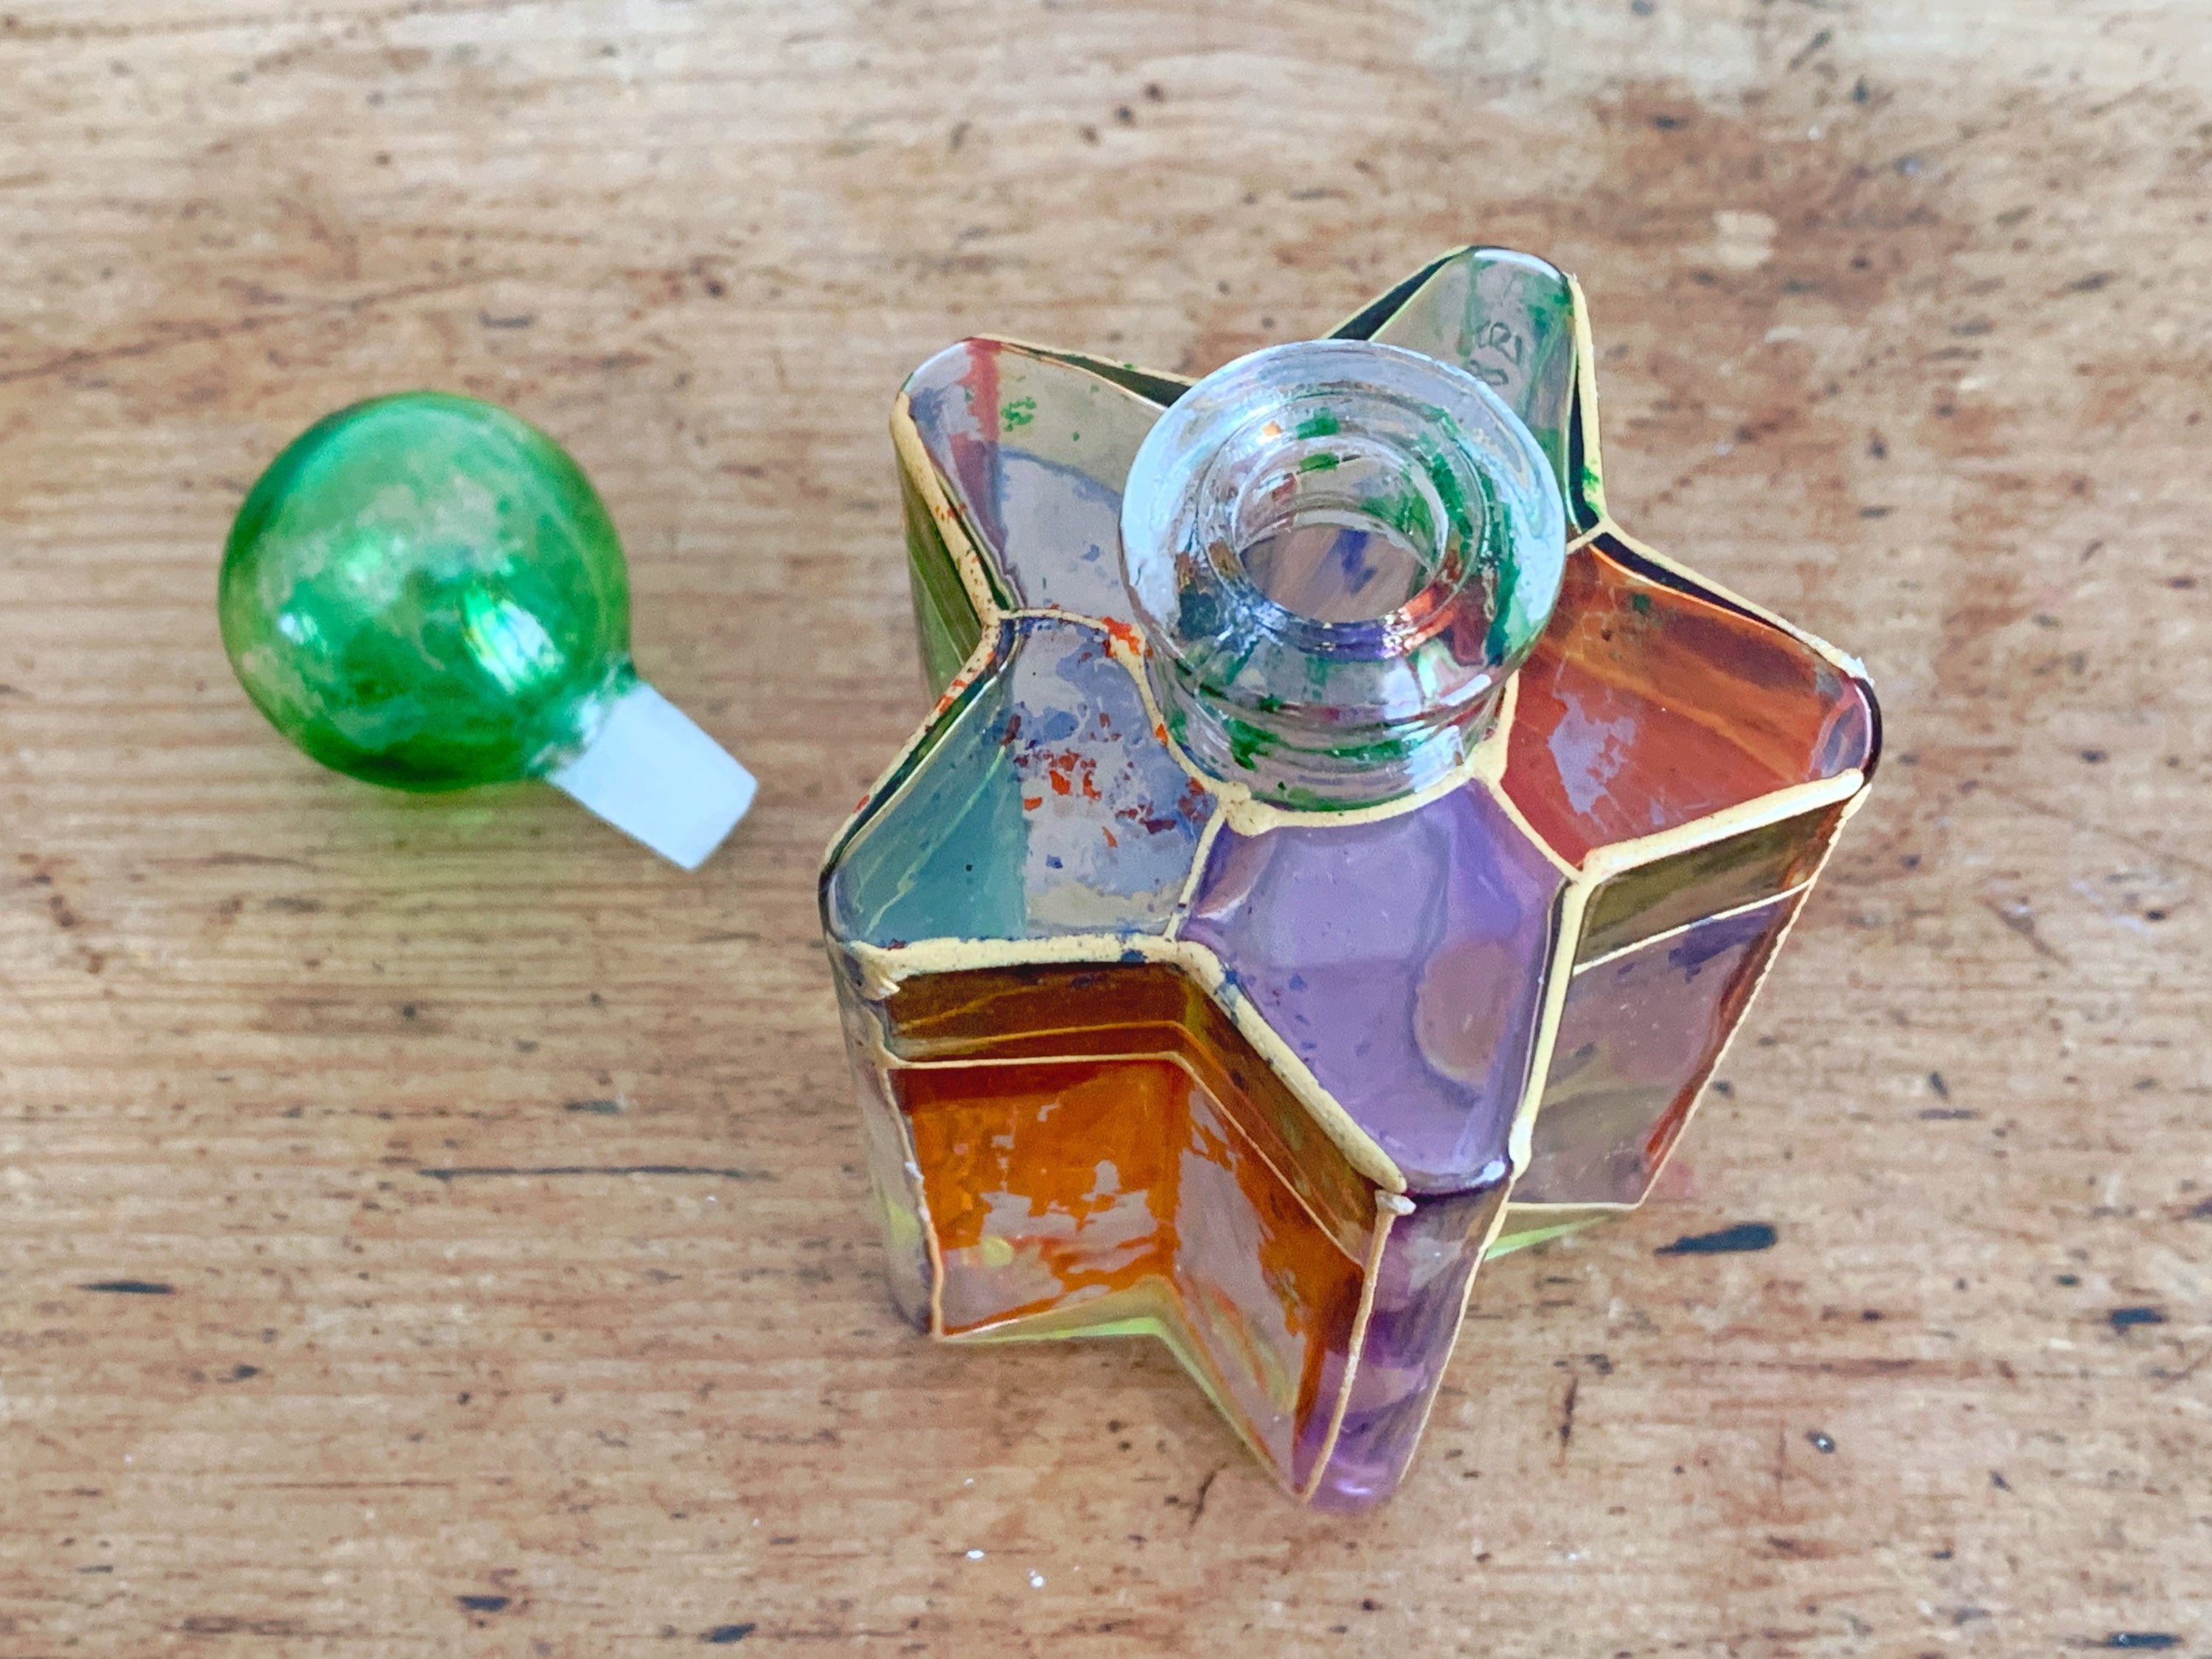 Vintage Hand Made Multi-Colored Art Glass Perfume Bottle in Star Shape with Round Stopper | Vanity Decor Gift for Her Valentine's Gift